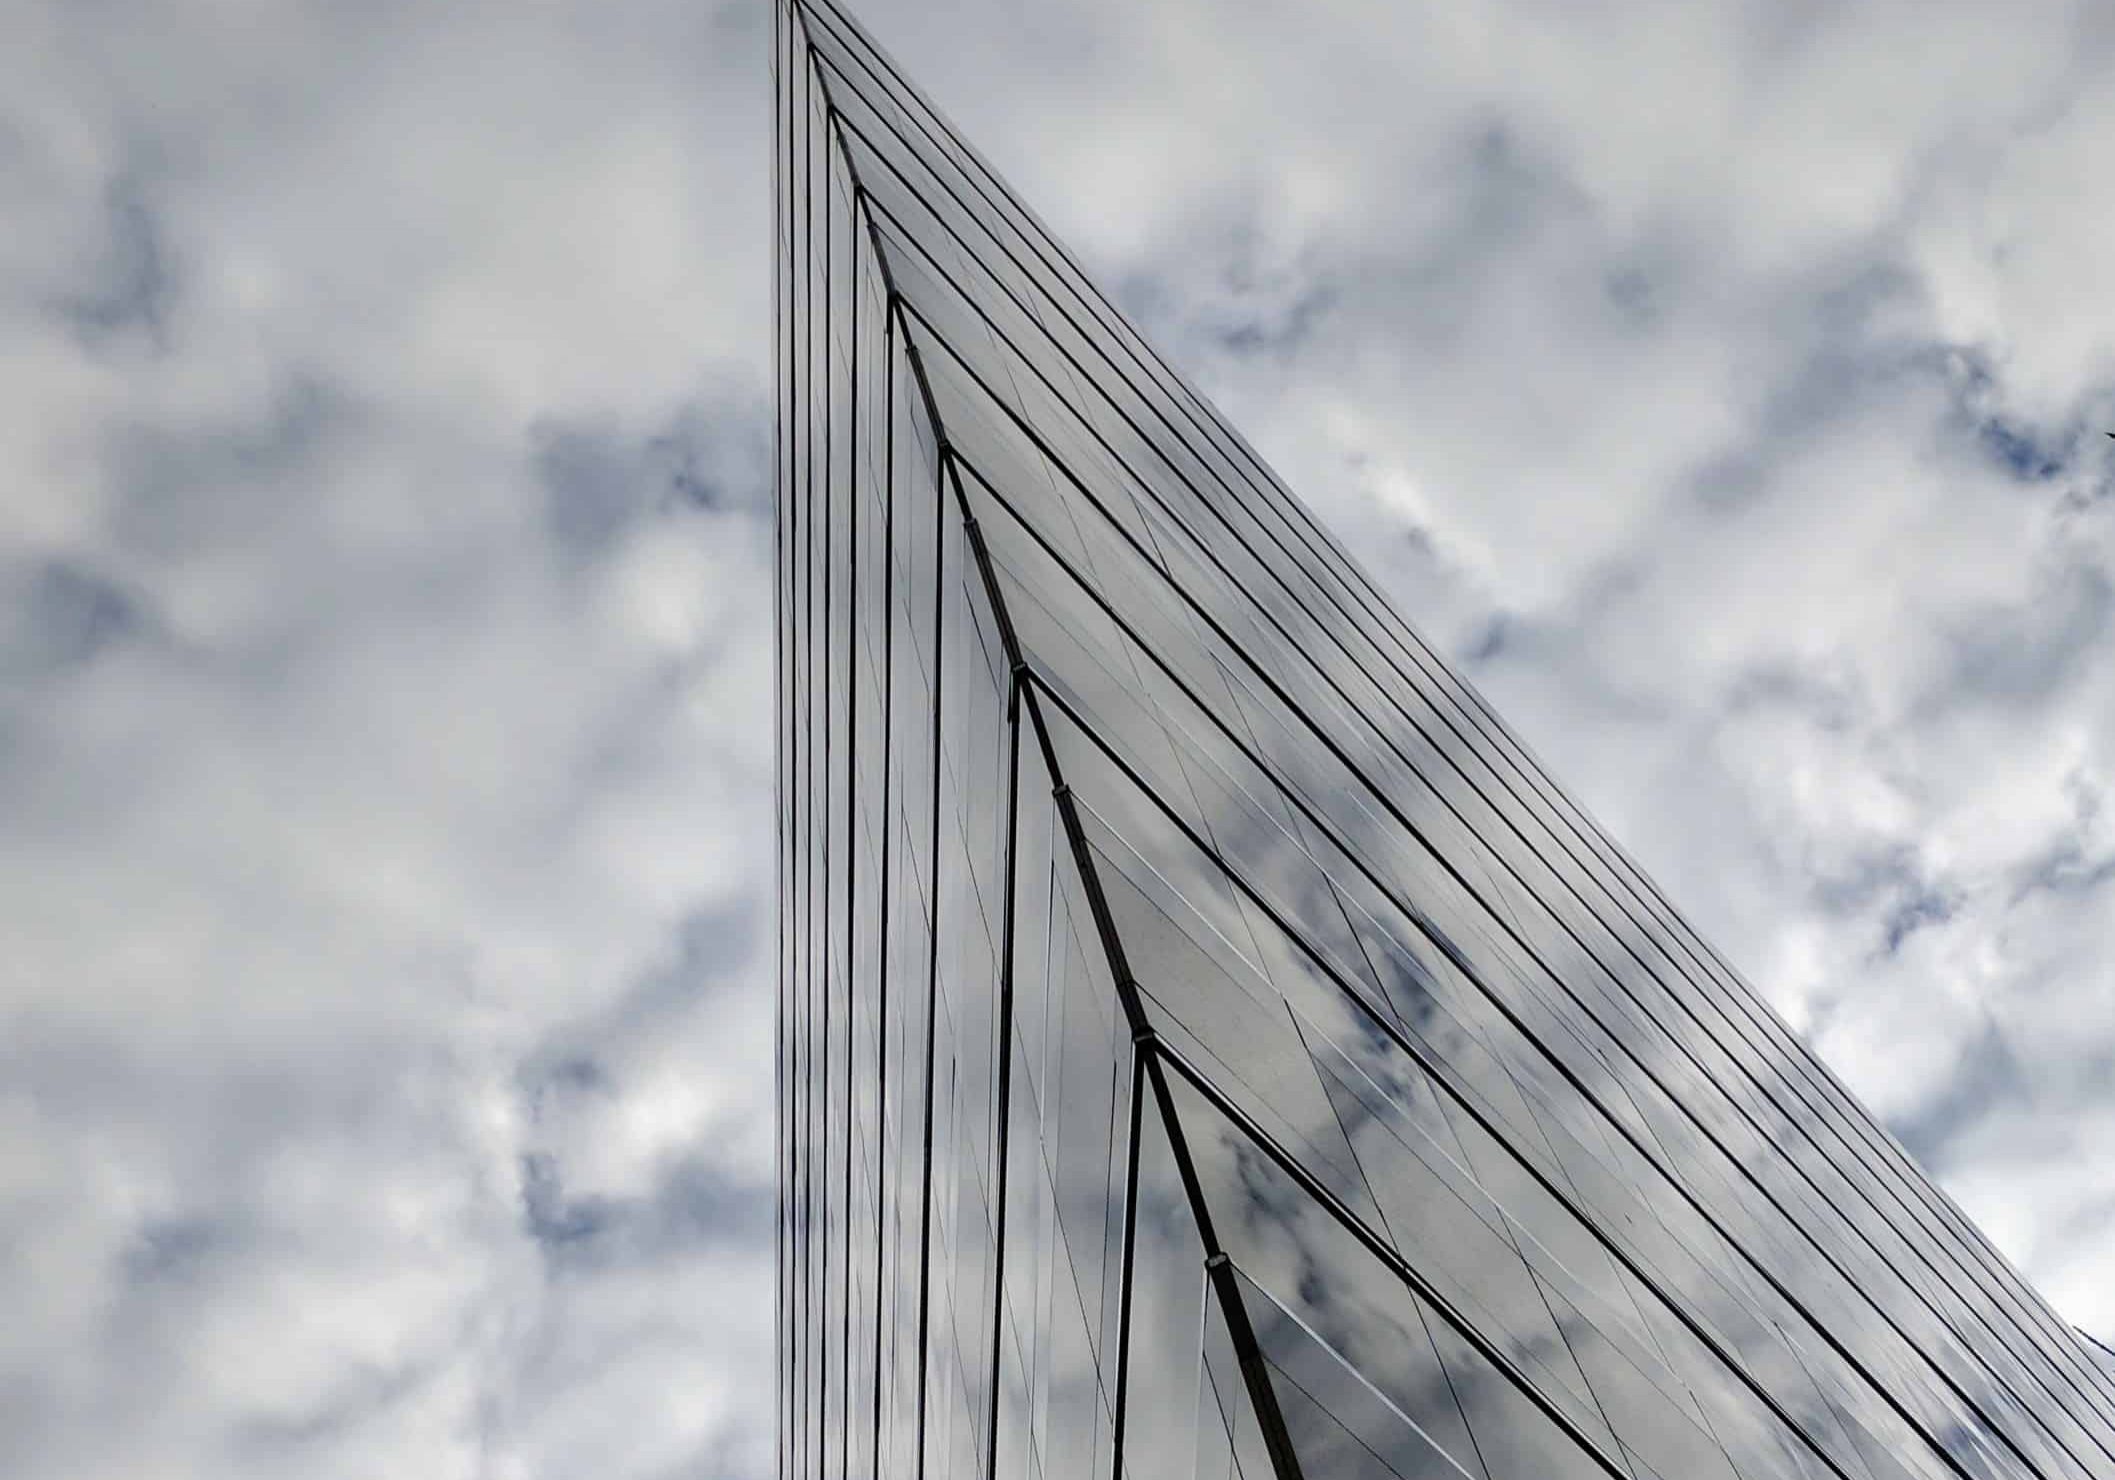 Mirror building under white clouds and blue sky